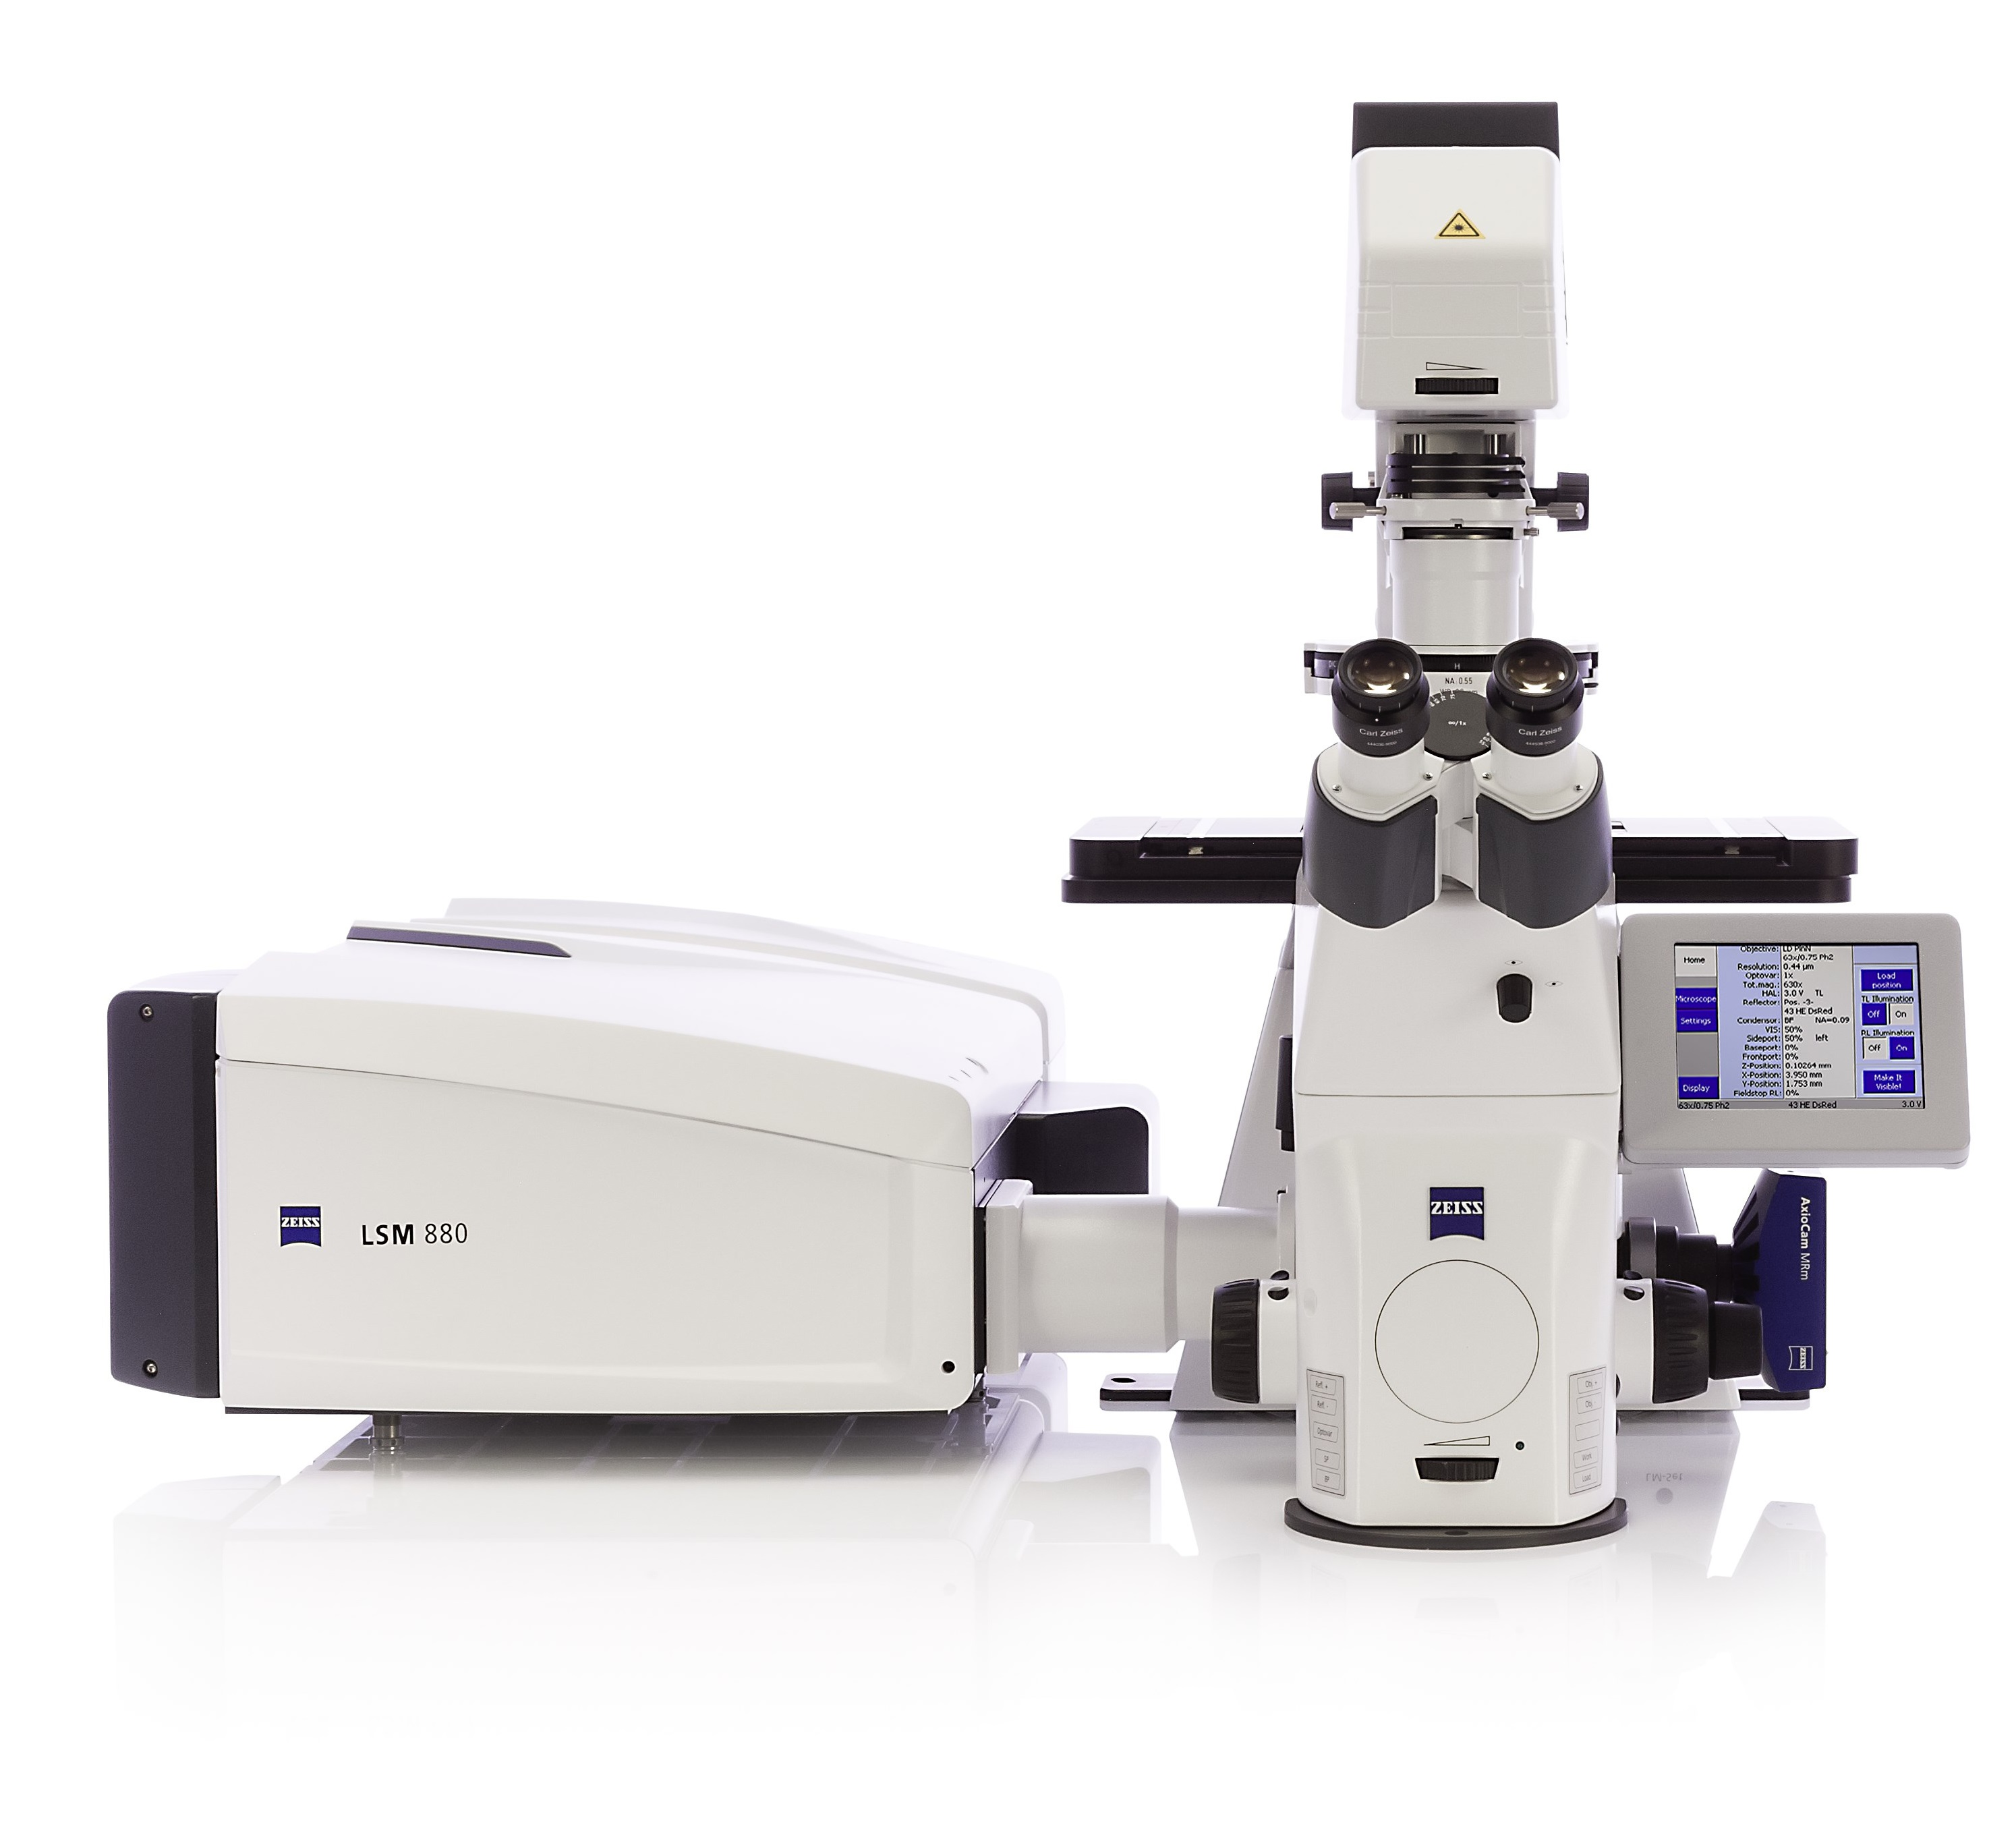 ZEISS LSM 800 with Airyscan microscope